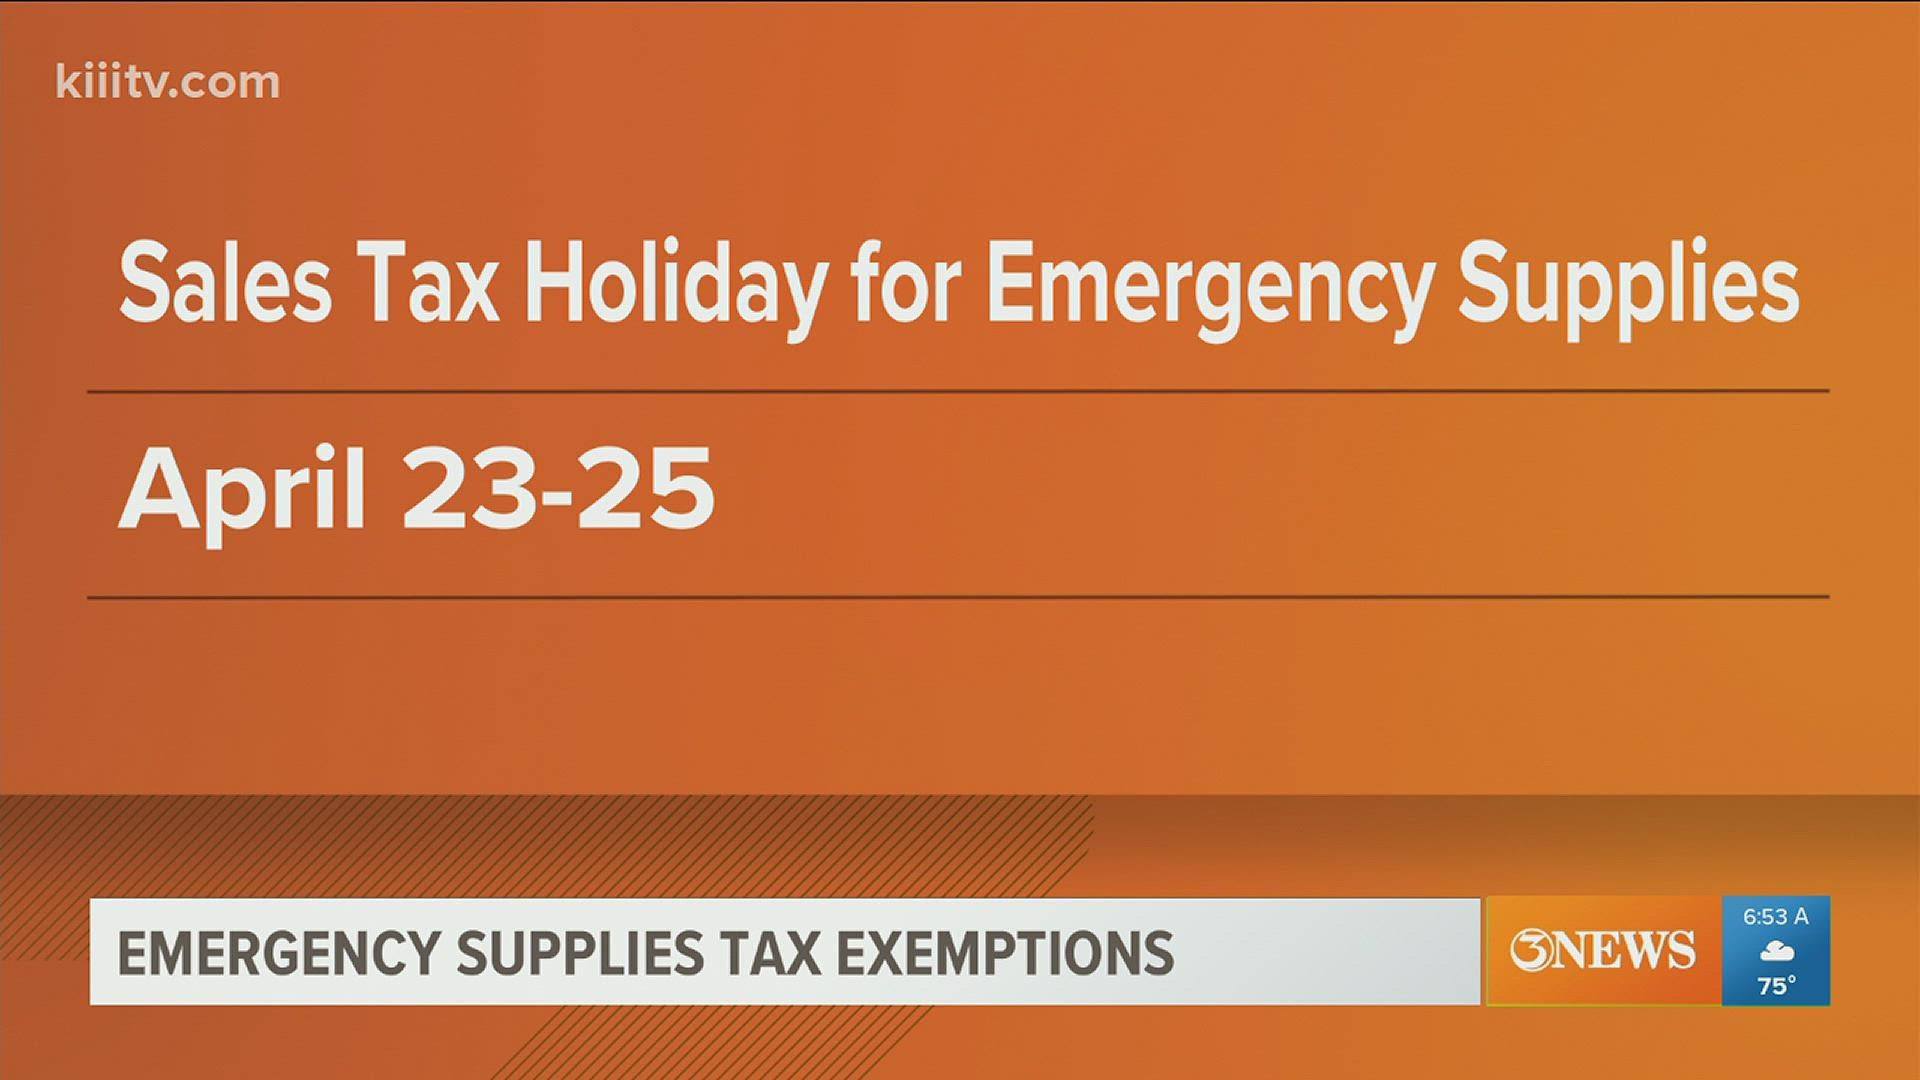 The 2022 Emergency Preparation Supplies Sales Tax Holiday runs from April 23 to April 25.